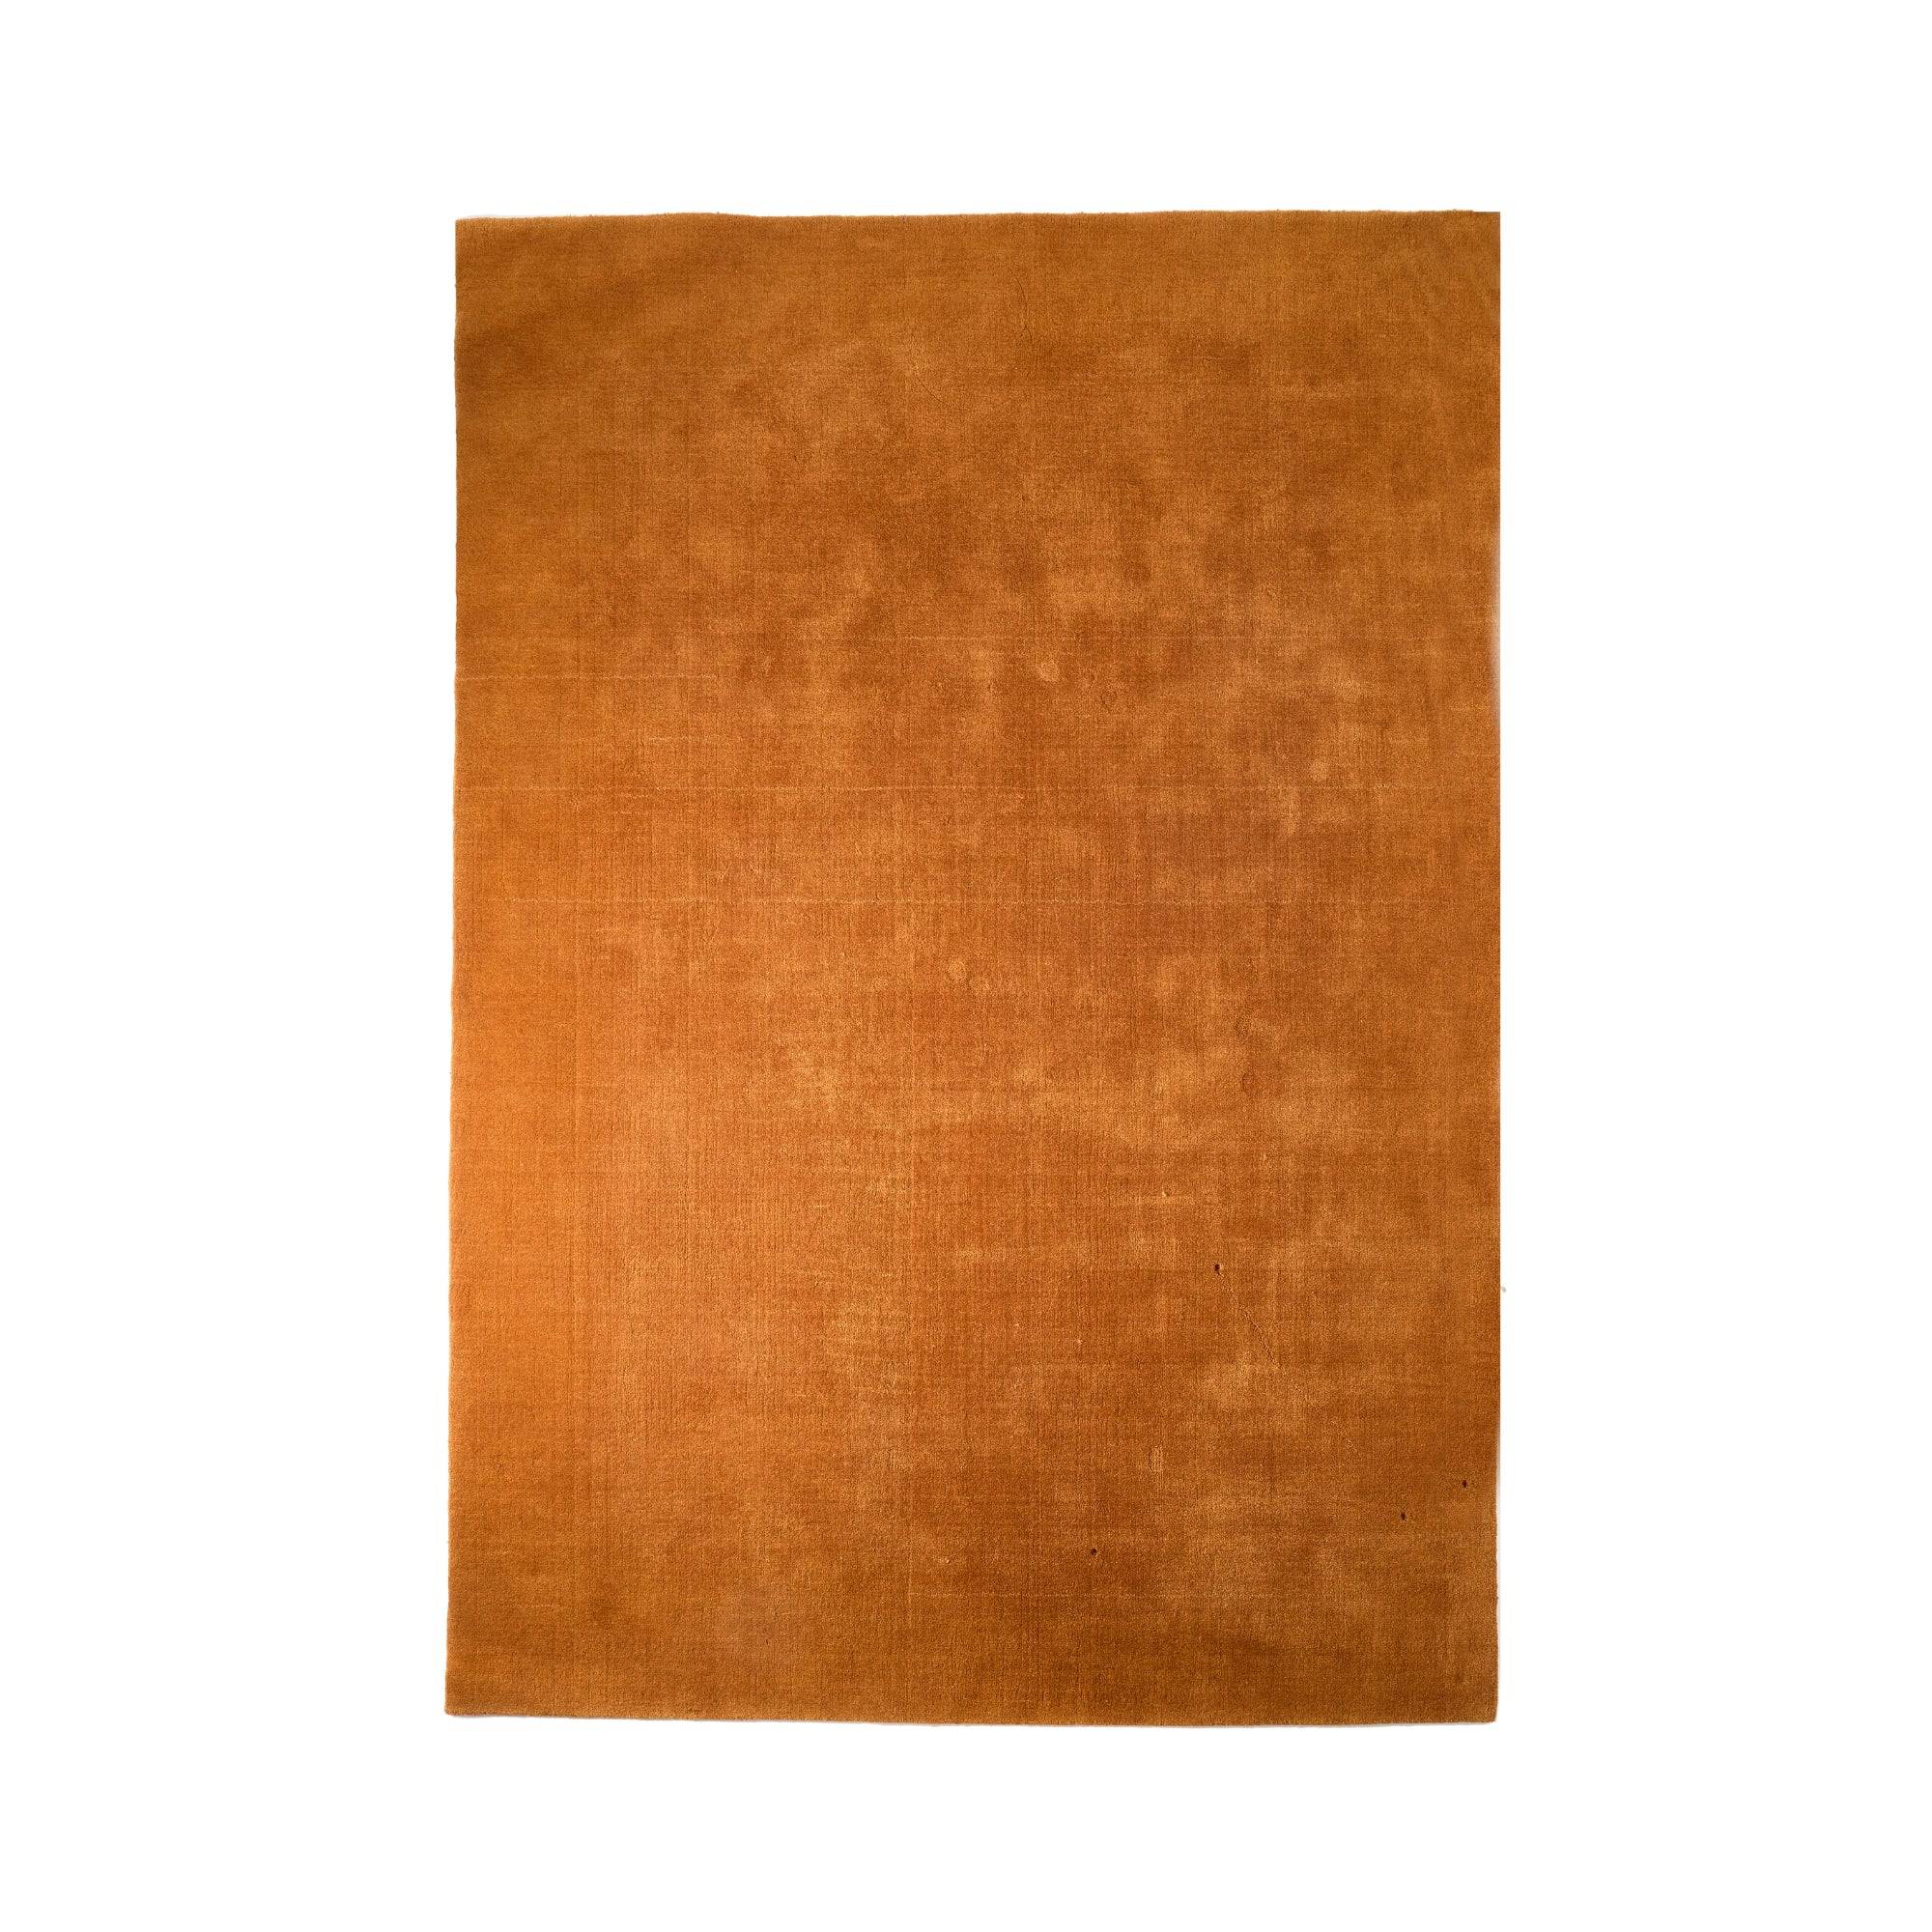 Outline Rug - Cognac - THAT COOL LIVING